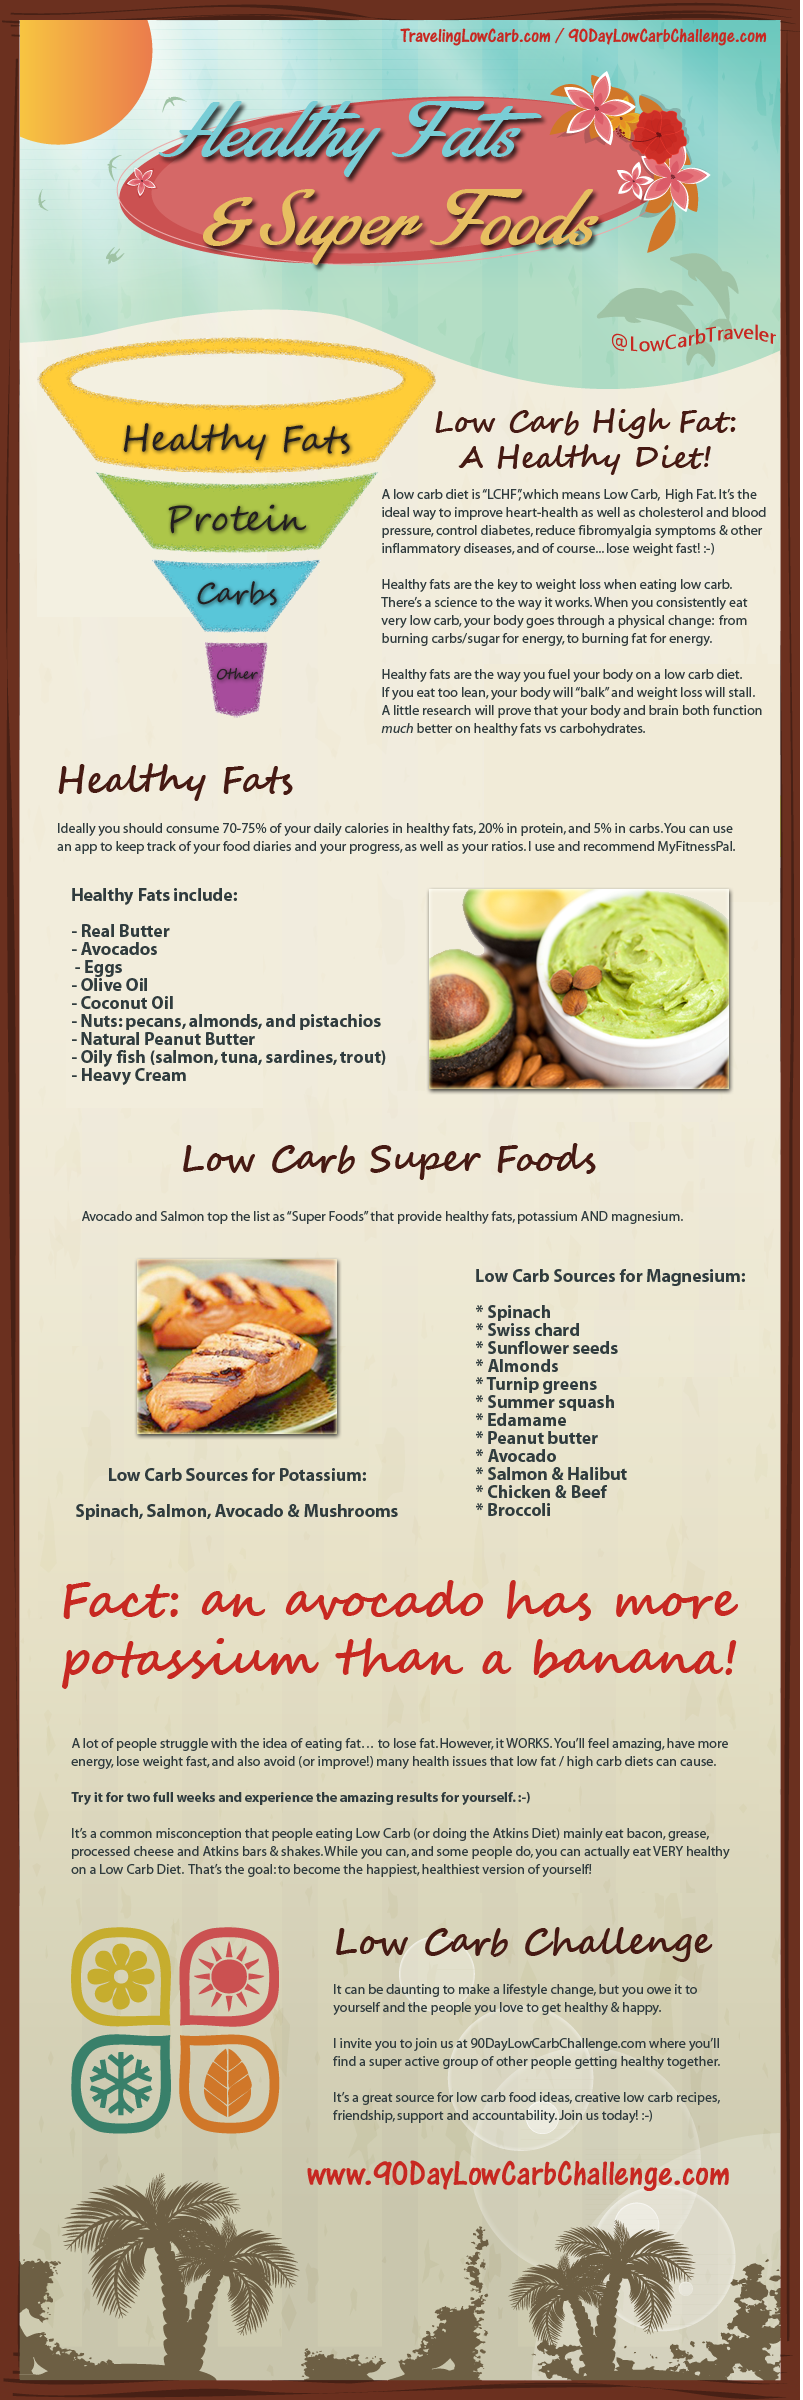 Healthy Fats and Super Foods for a Low Carb Diet